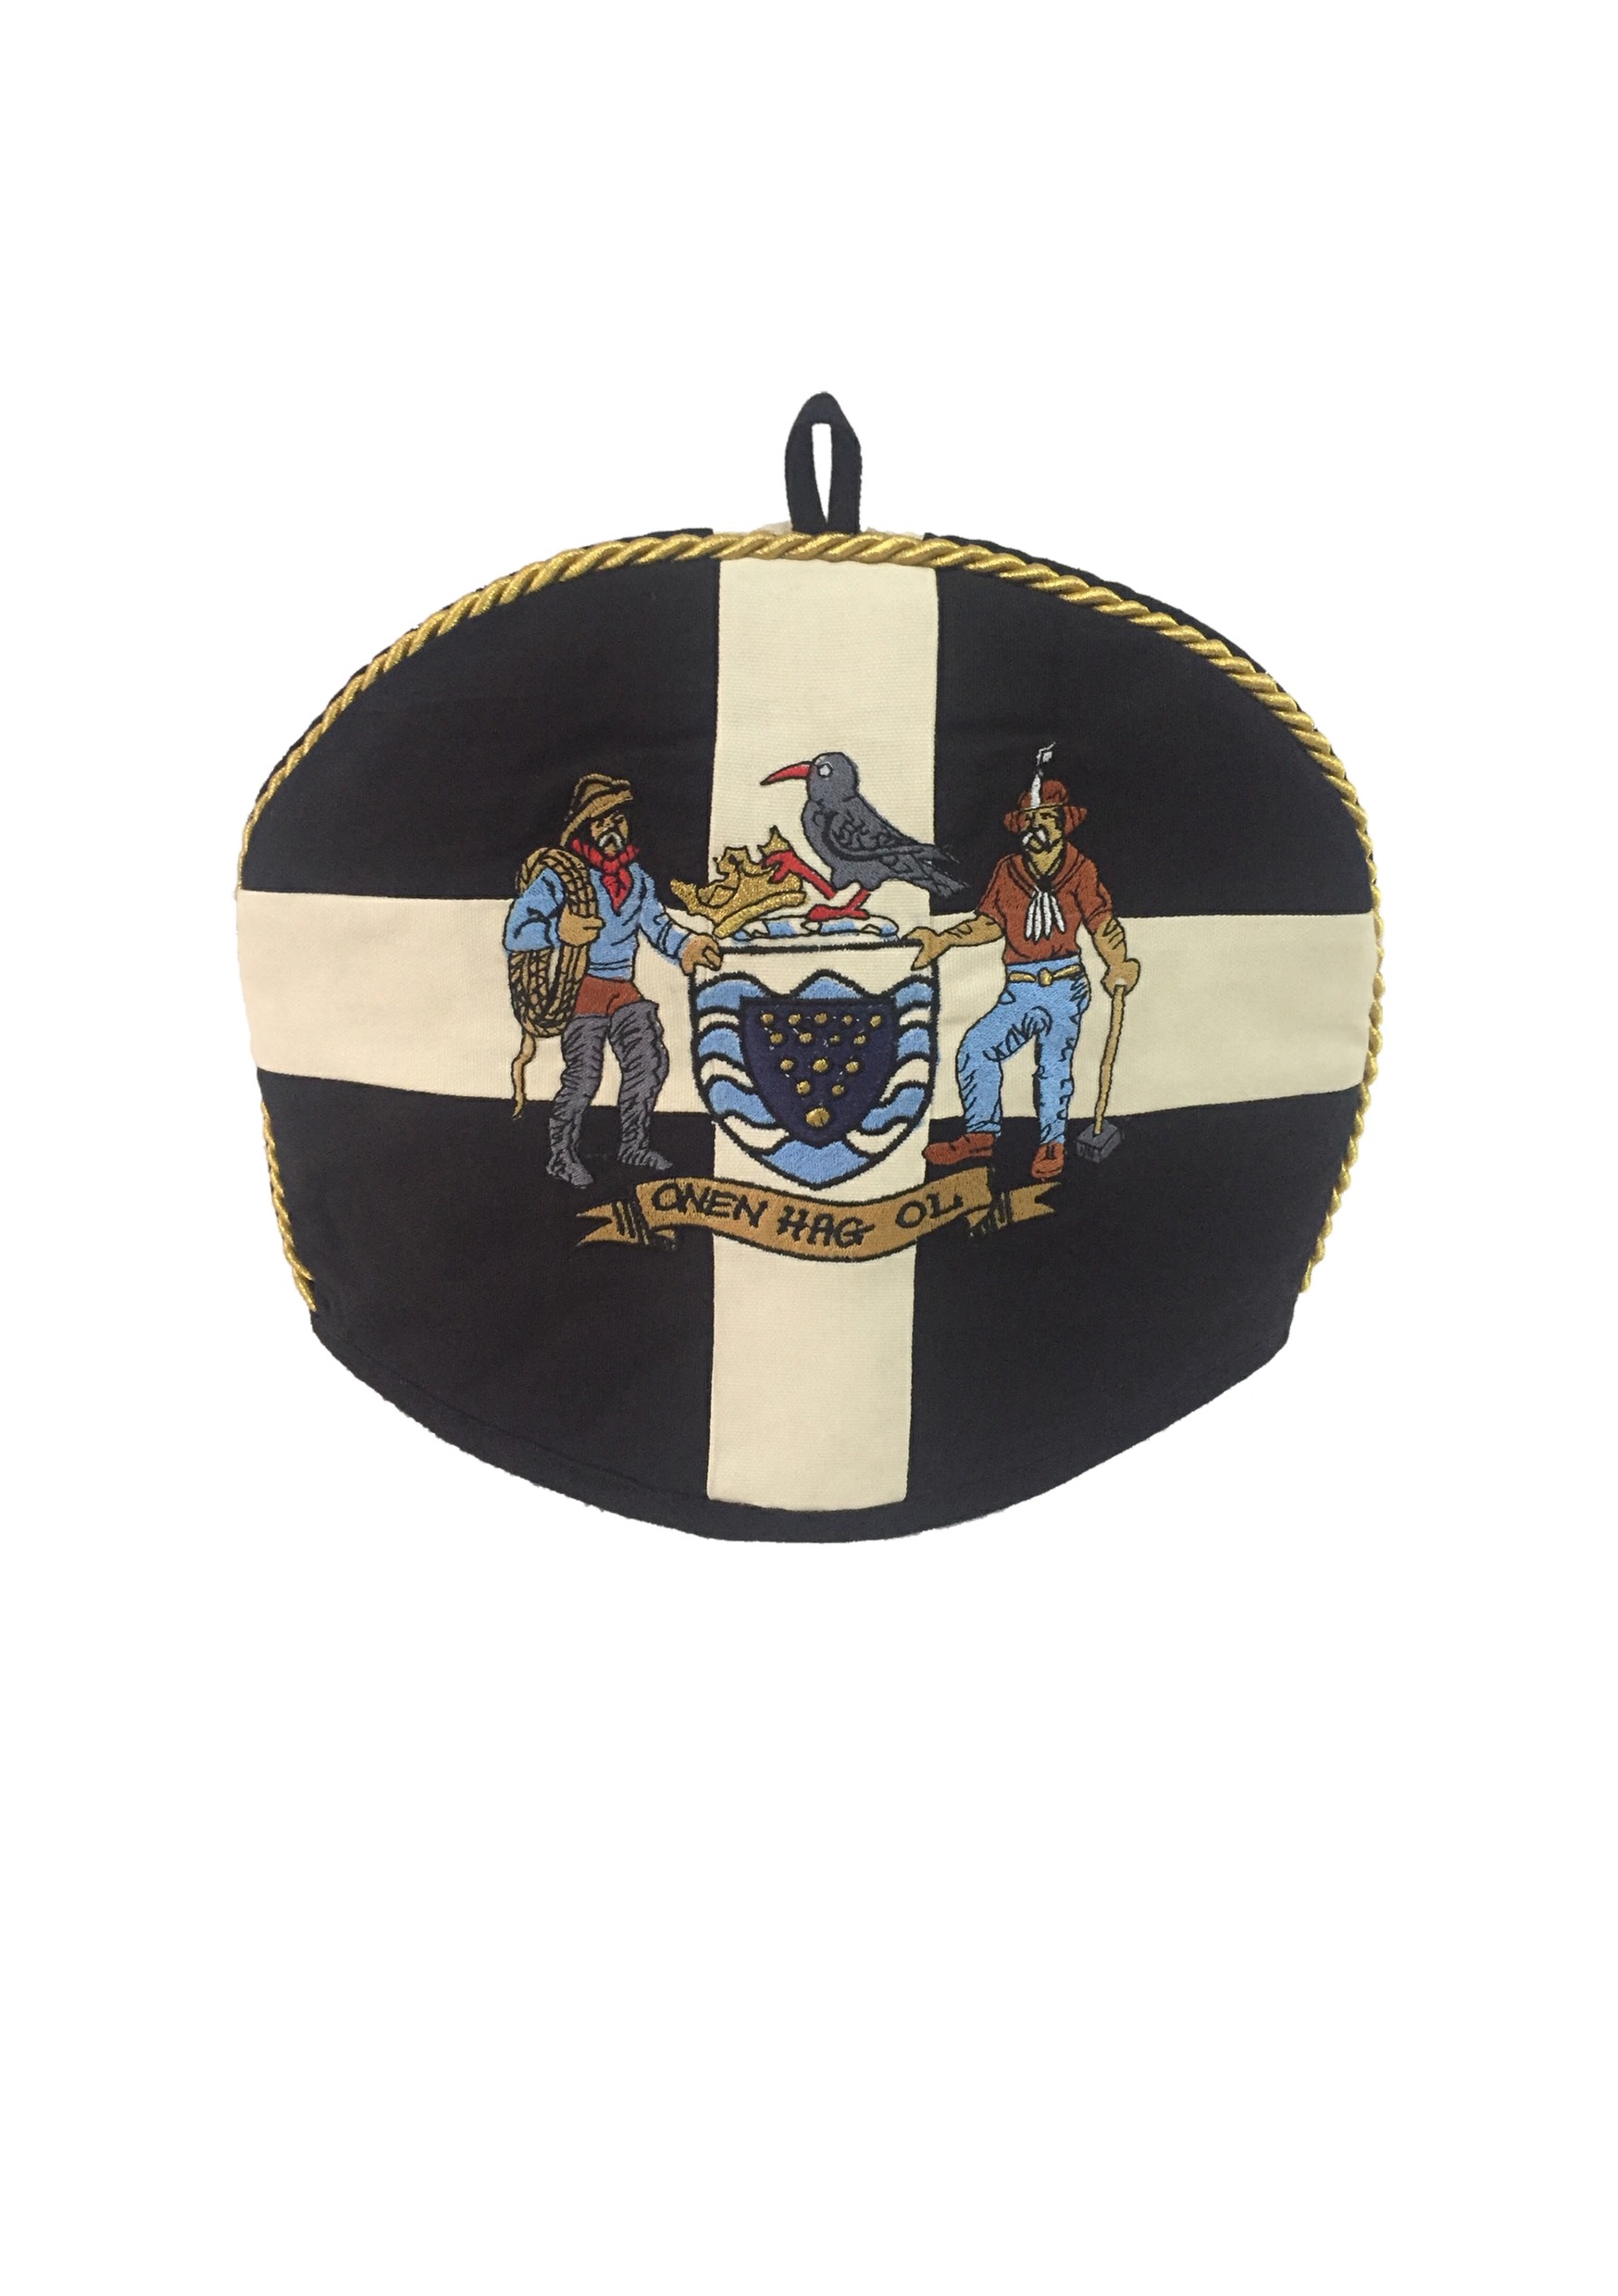 Cornwall Flag and Crest Embroidered Tea Cosy